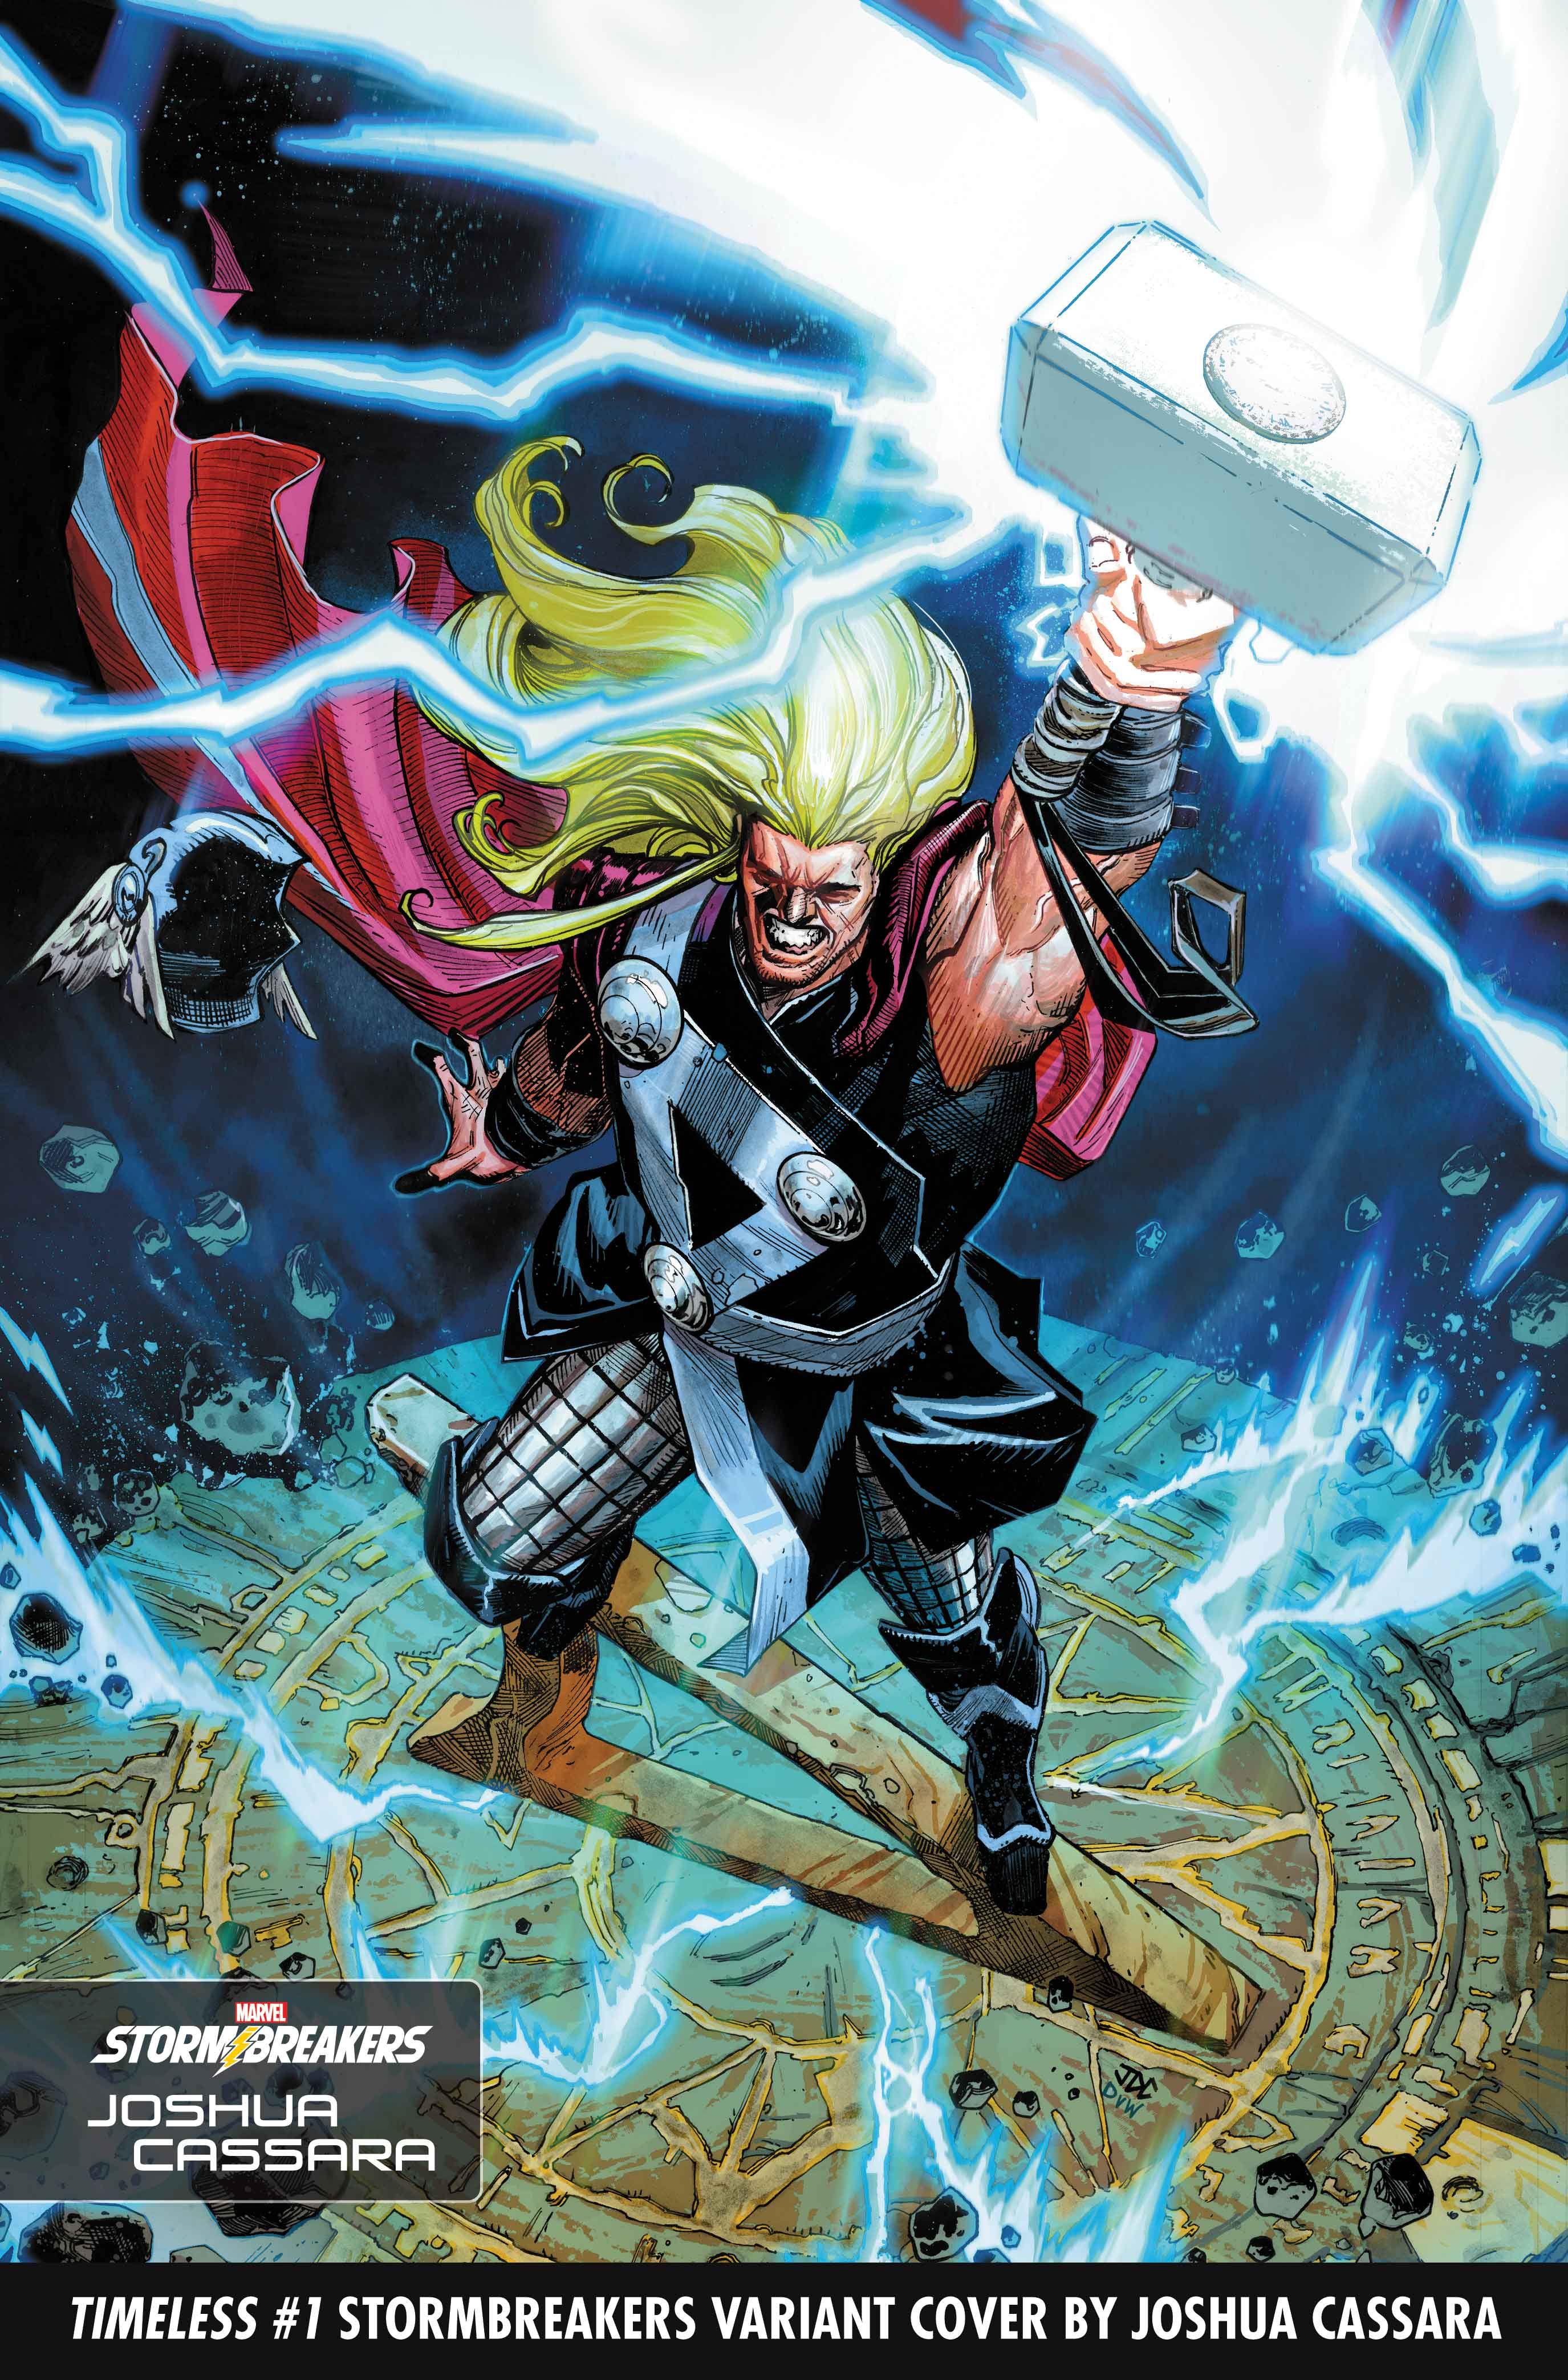 Thor on the cover of Timeless 1 Stormbreakers variant by Joshua Cassara